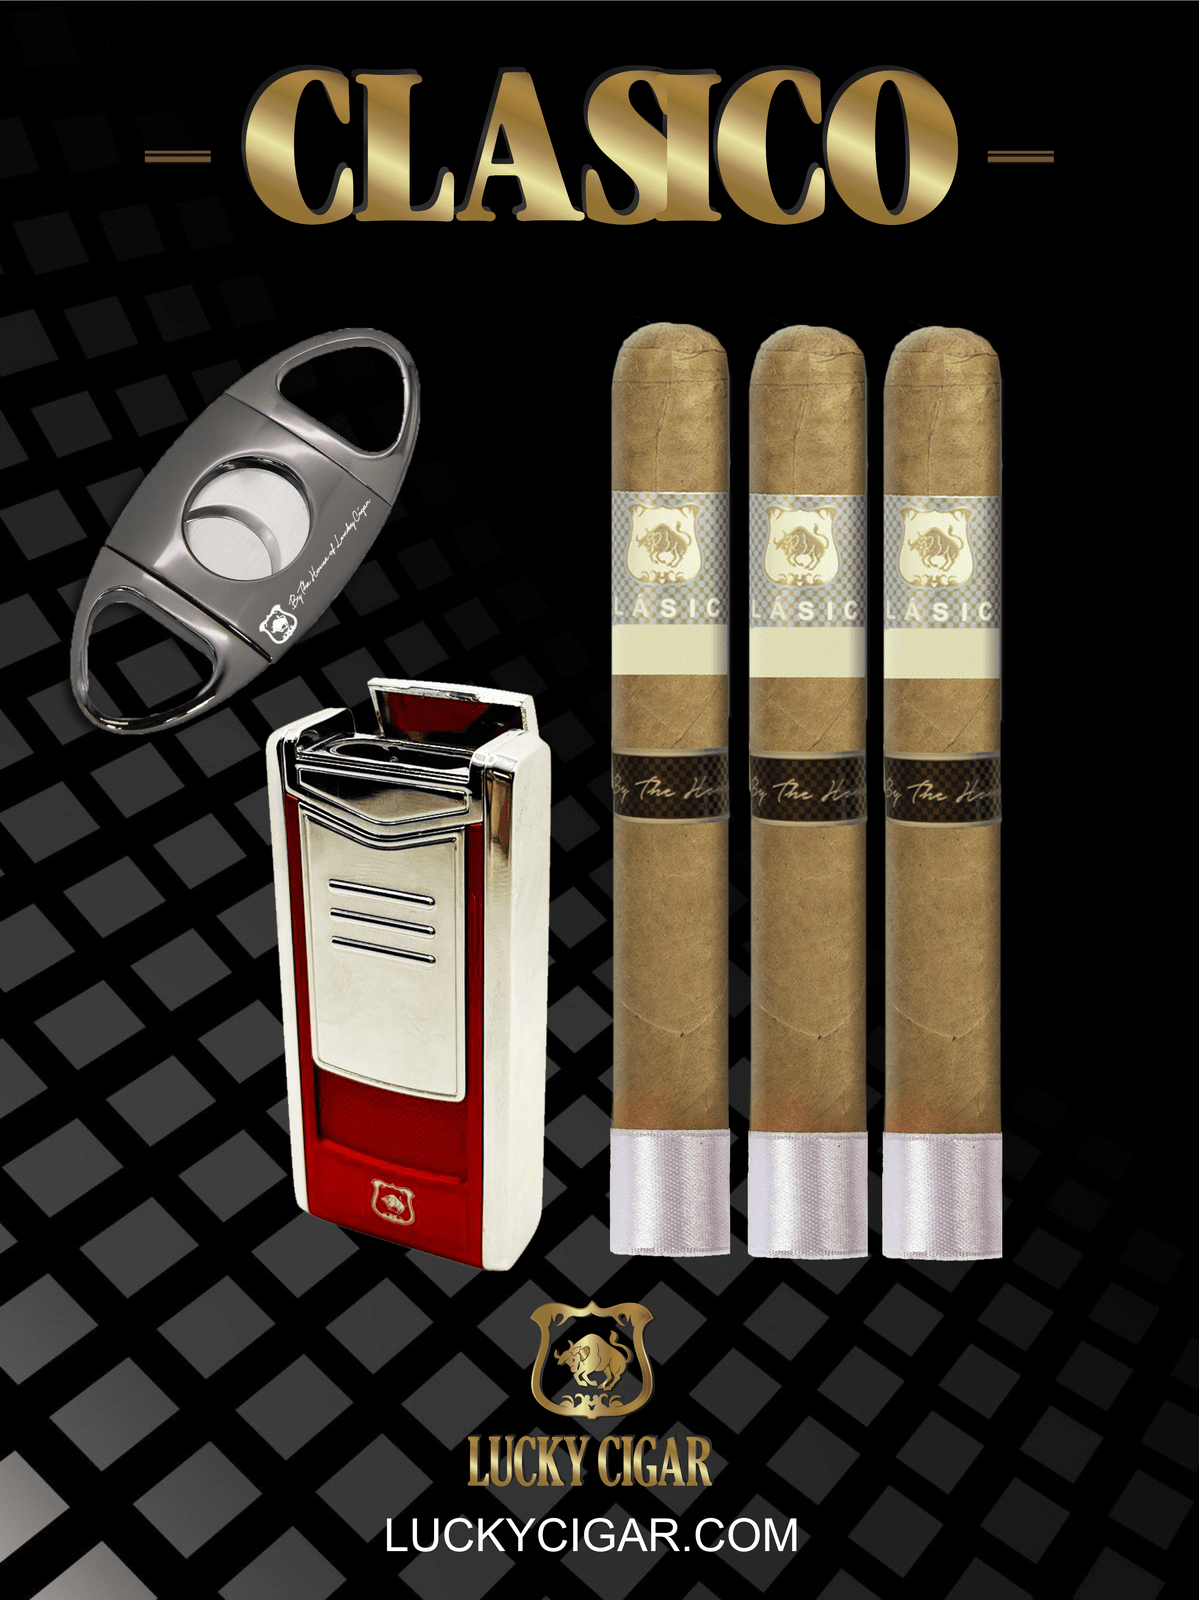 Classic Cigars - Classico by Lucky Cigar: Set of 3 Cigars, 3 Toro with Cutter